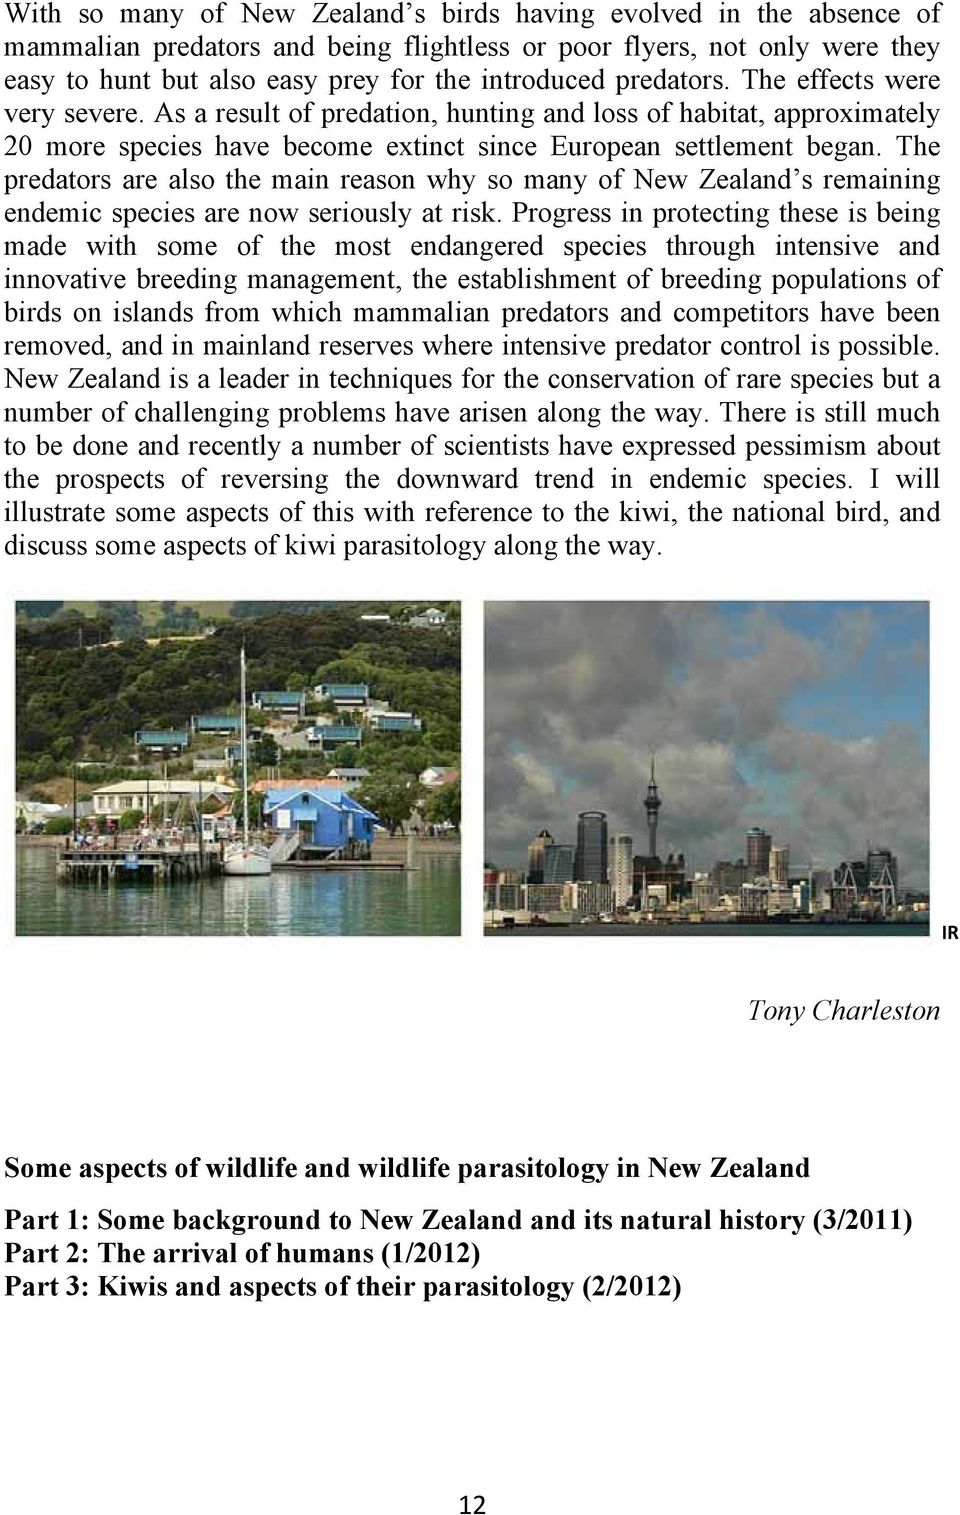 The predators are also the main reason why so many of New Zealand s remaining endemic species are now seriously at risk.